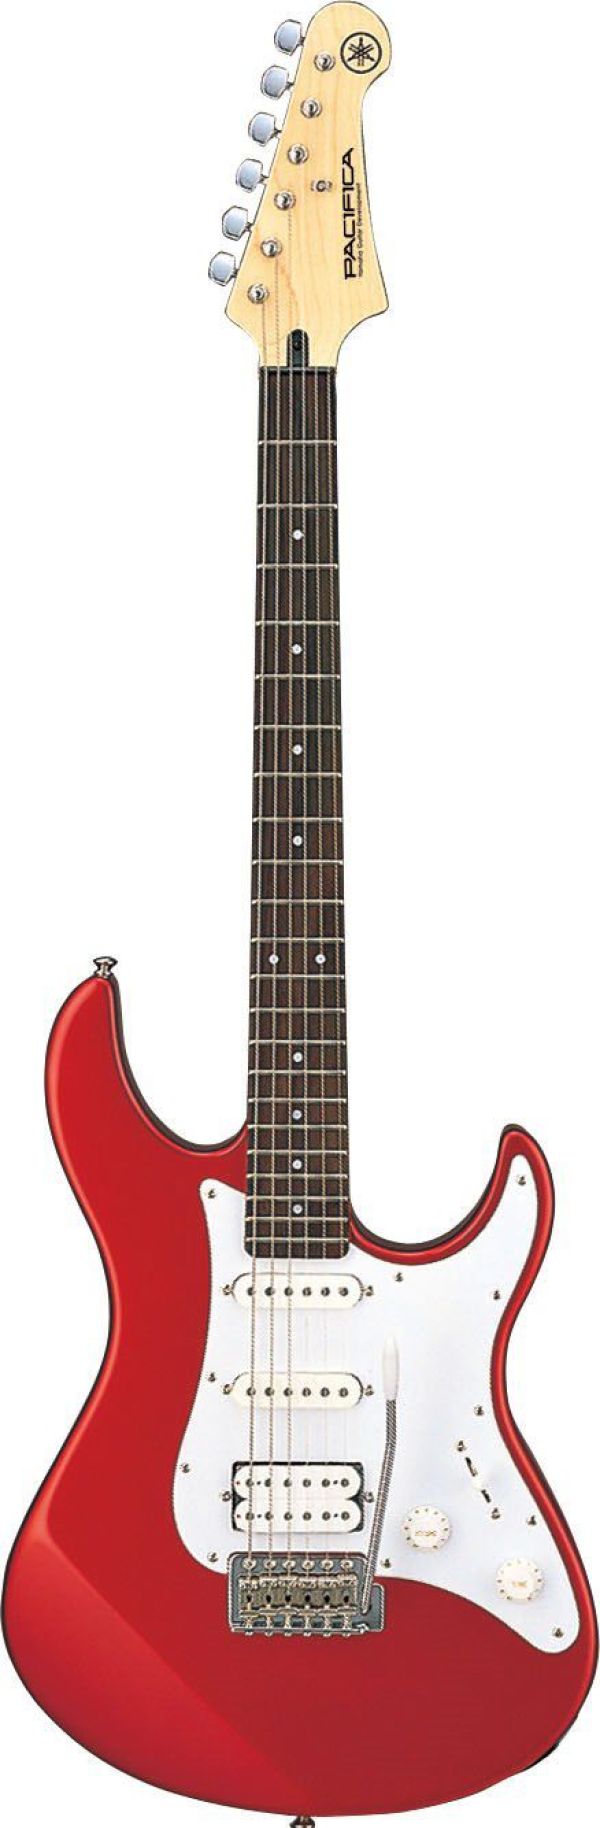 PACIFICA 012 RED METALLIC ELECTRIC GUITAR W APP FRATELLO